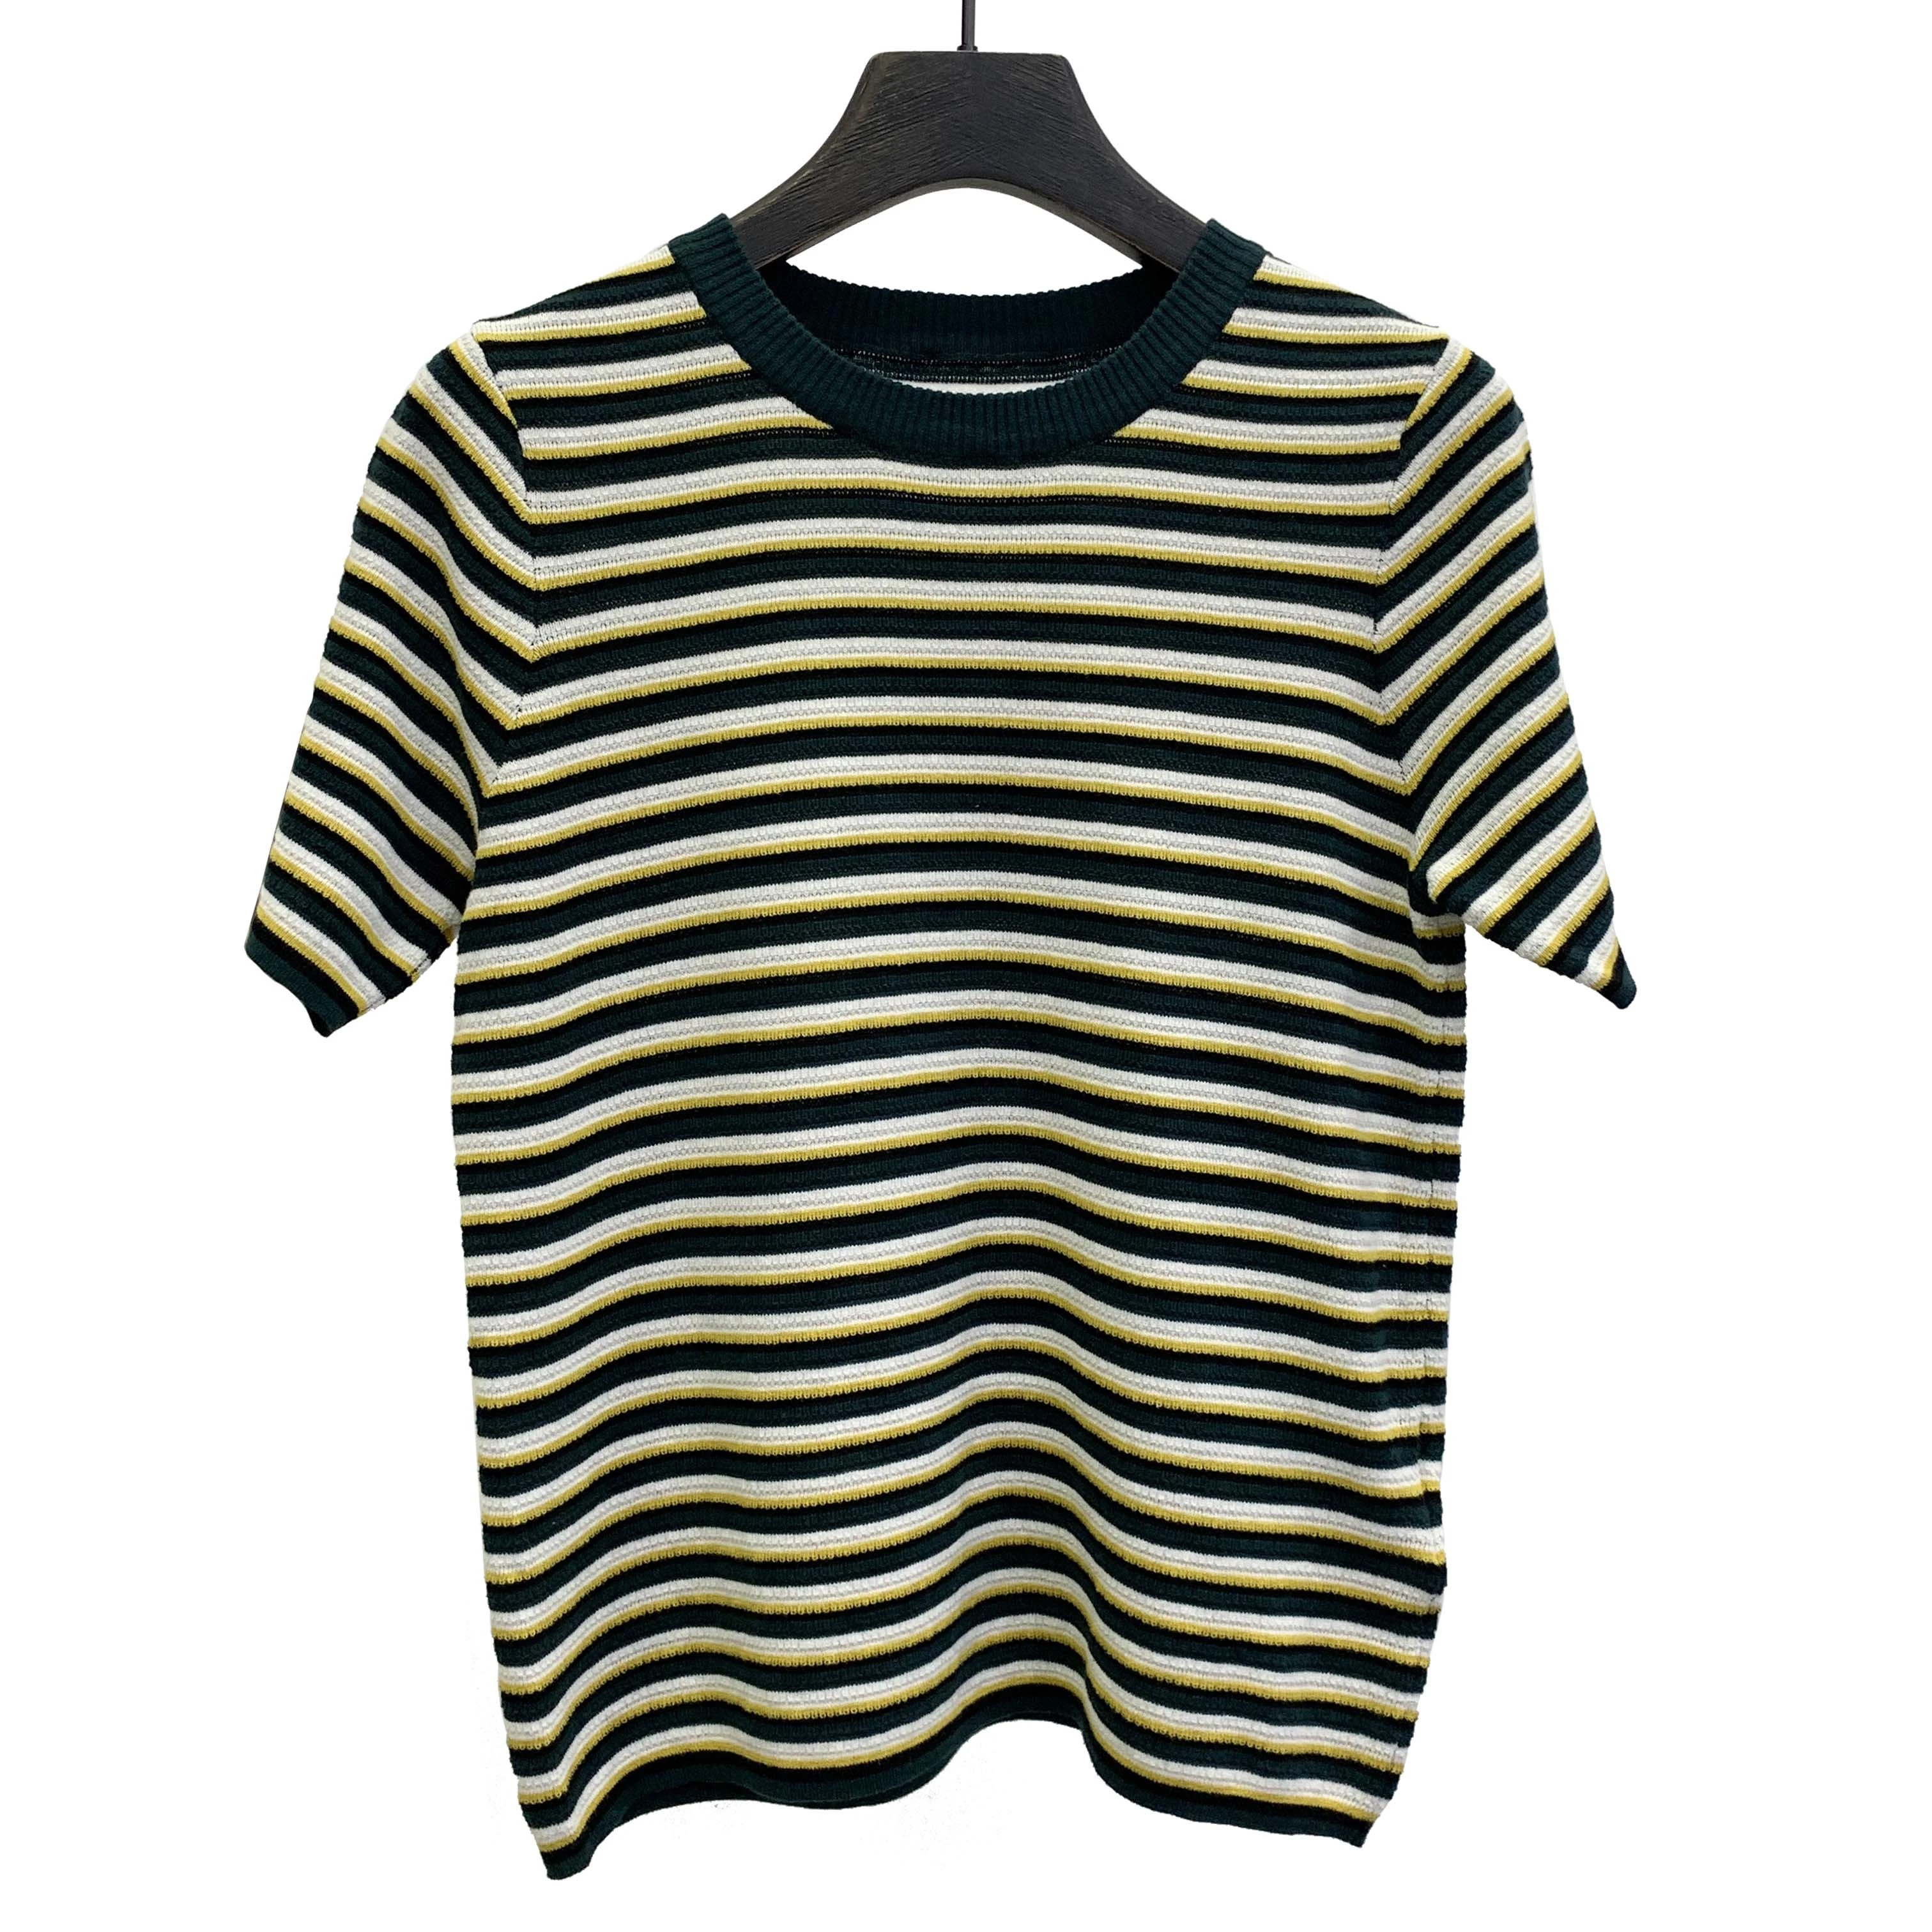 The latest fashion in the summer of 2021 female sexy top round collar striped T-shirt short sleeve female top fashion